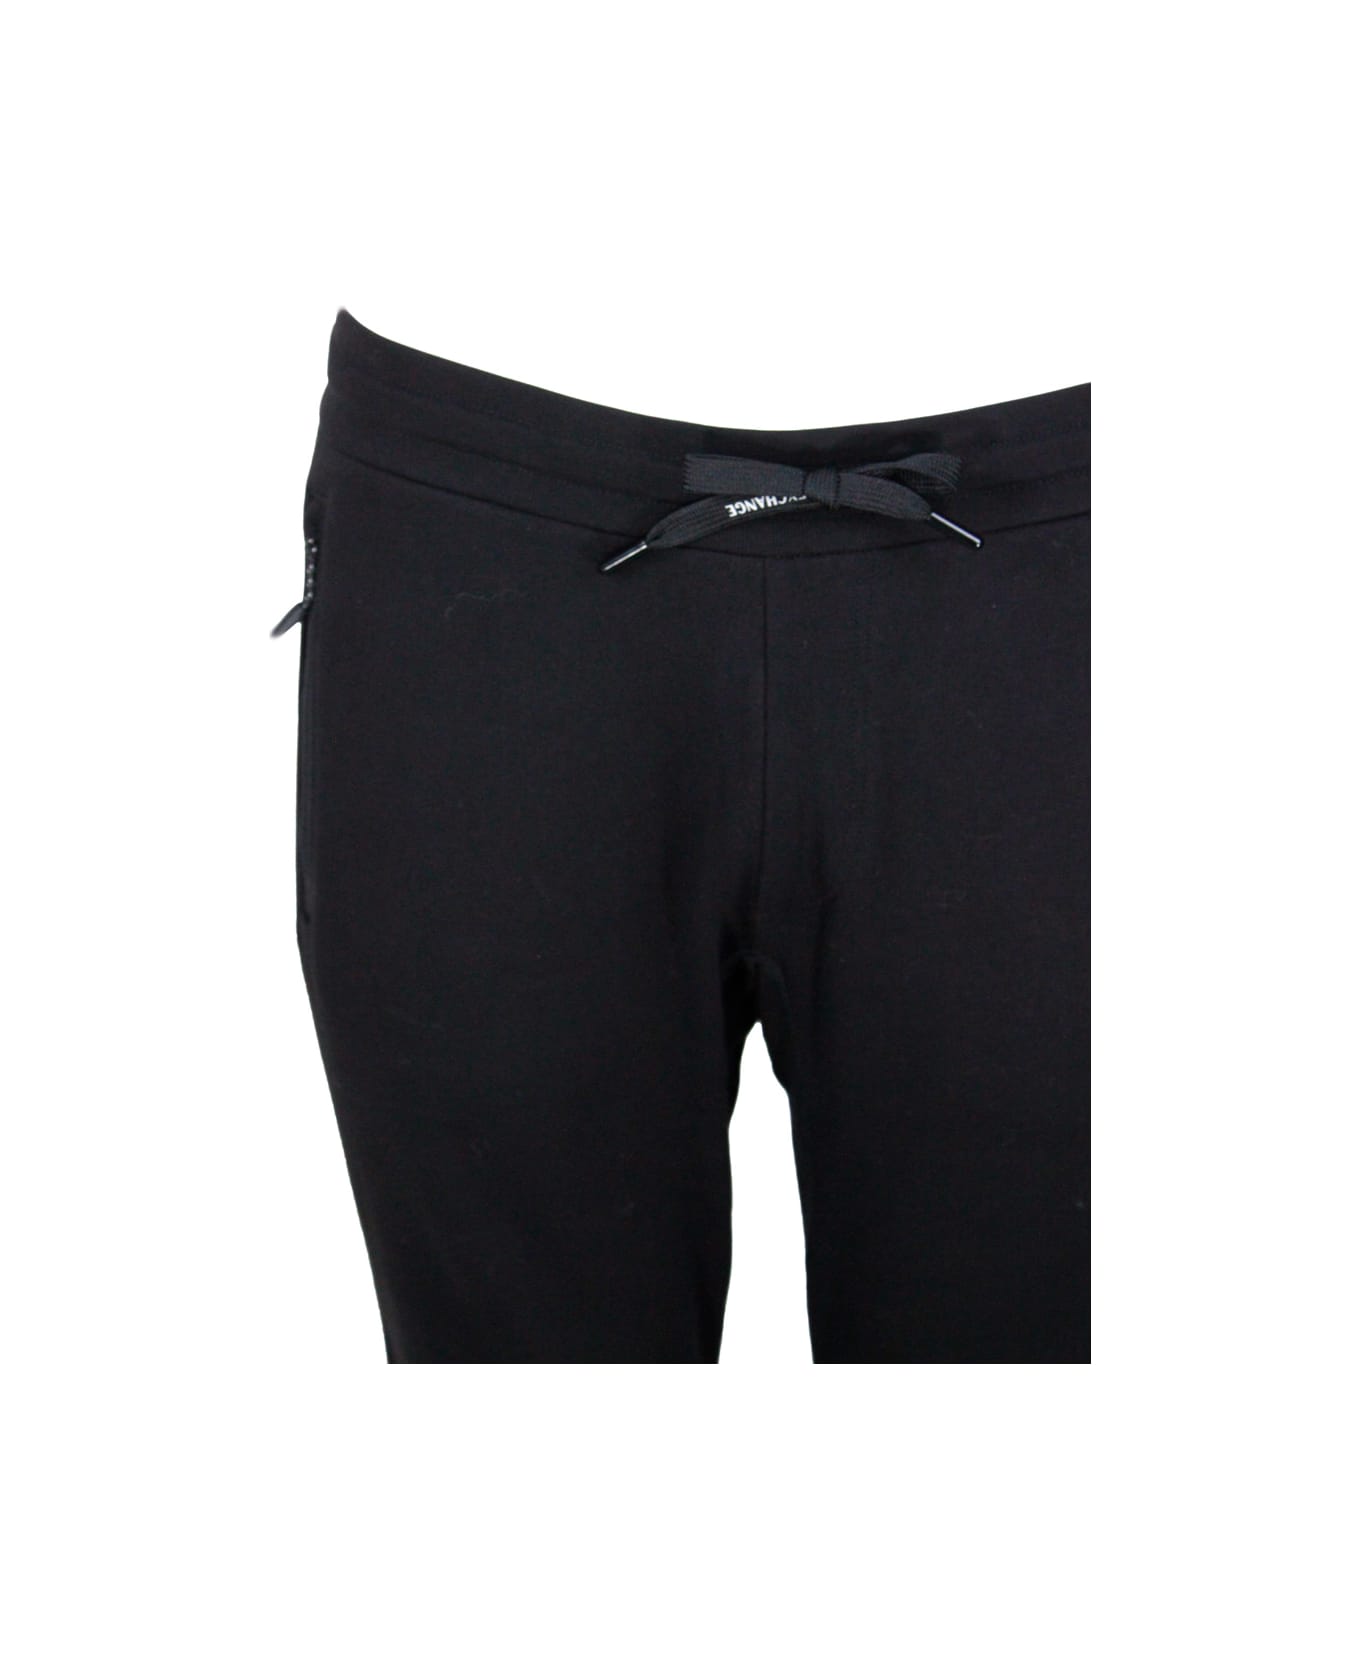 Armani Collezioni Cotton Fleece Jogging Trousers With Drawstring At The Waist And Cuff At The Bottom - Black